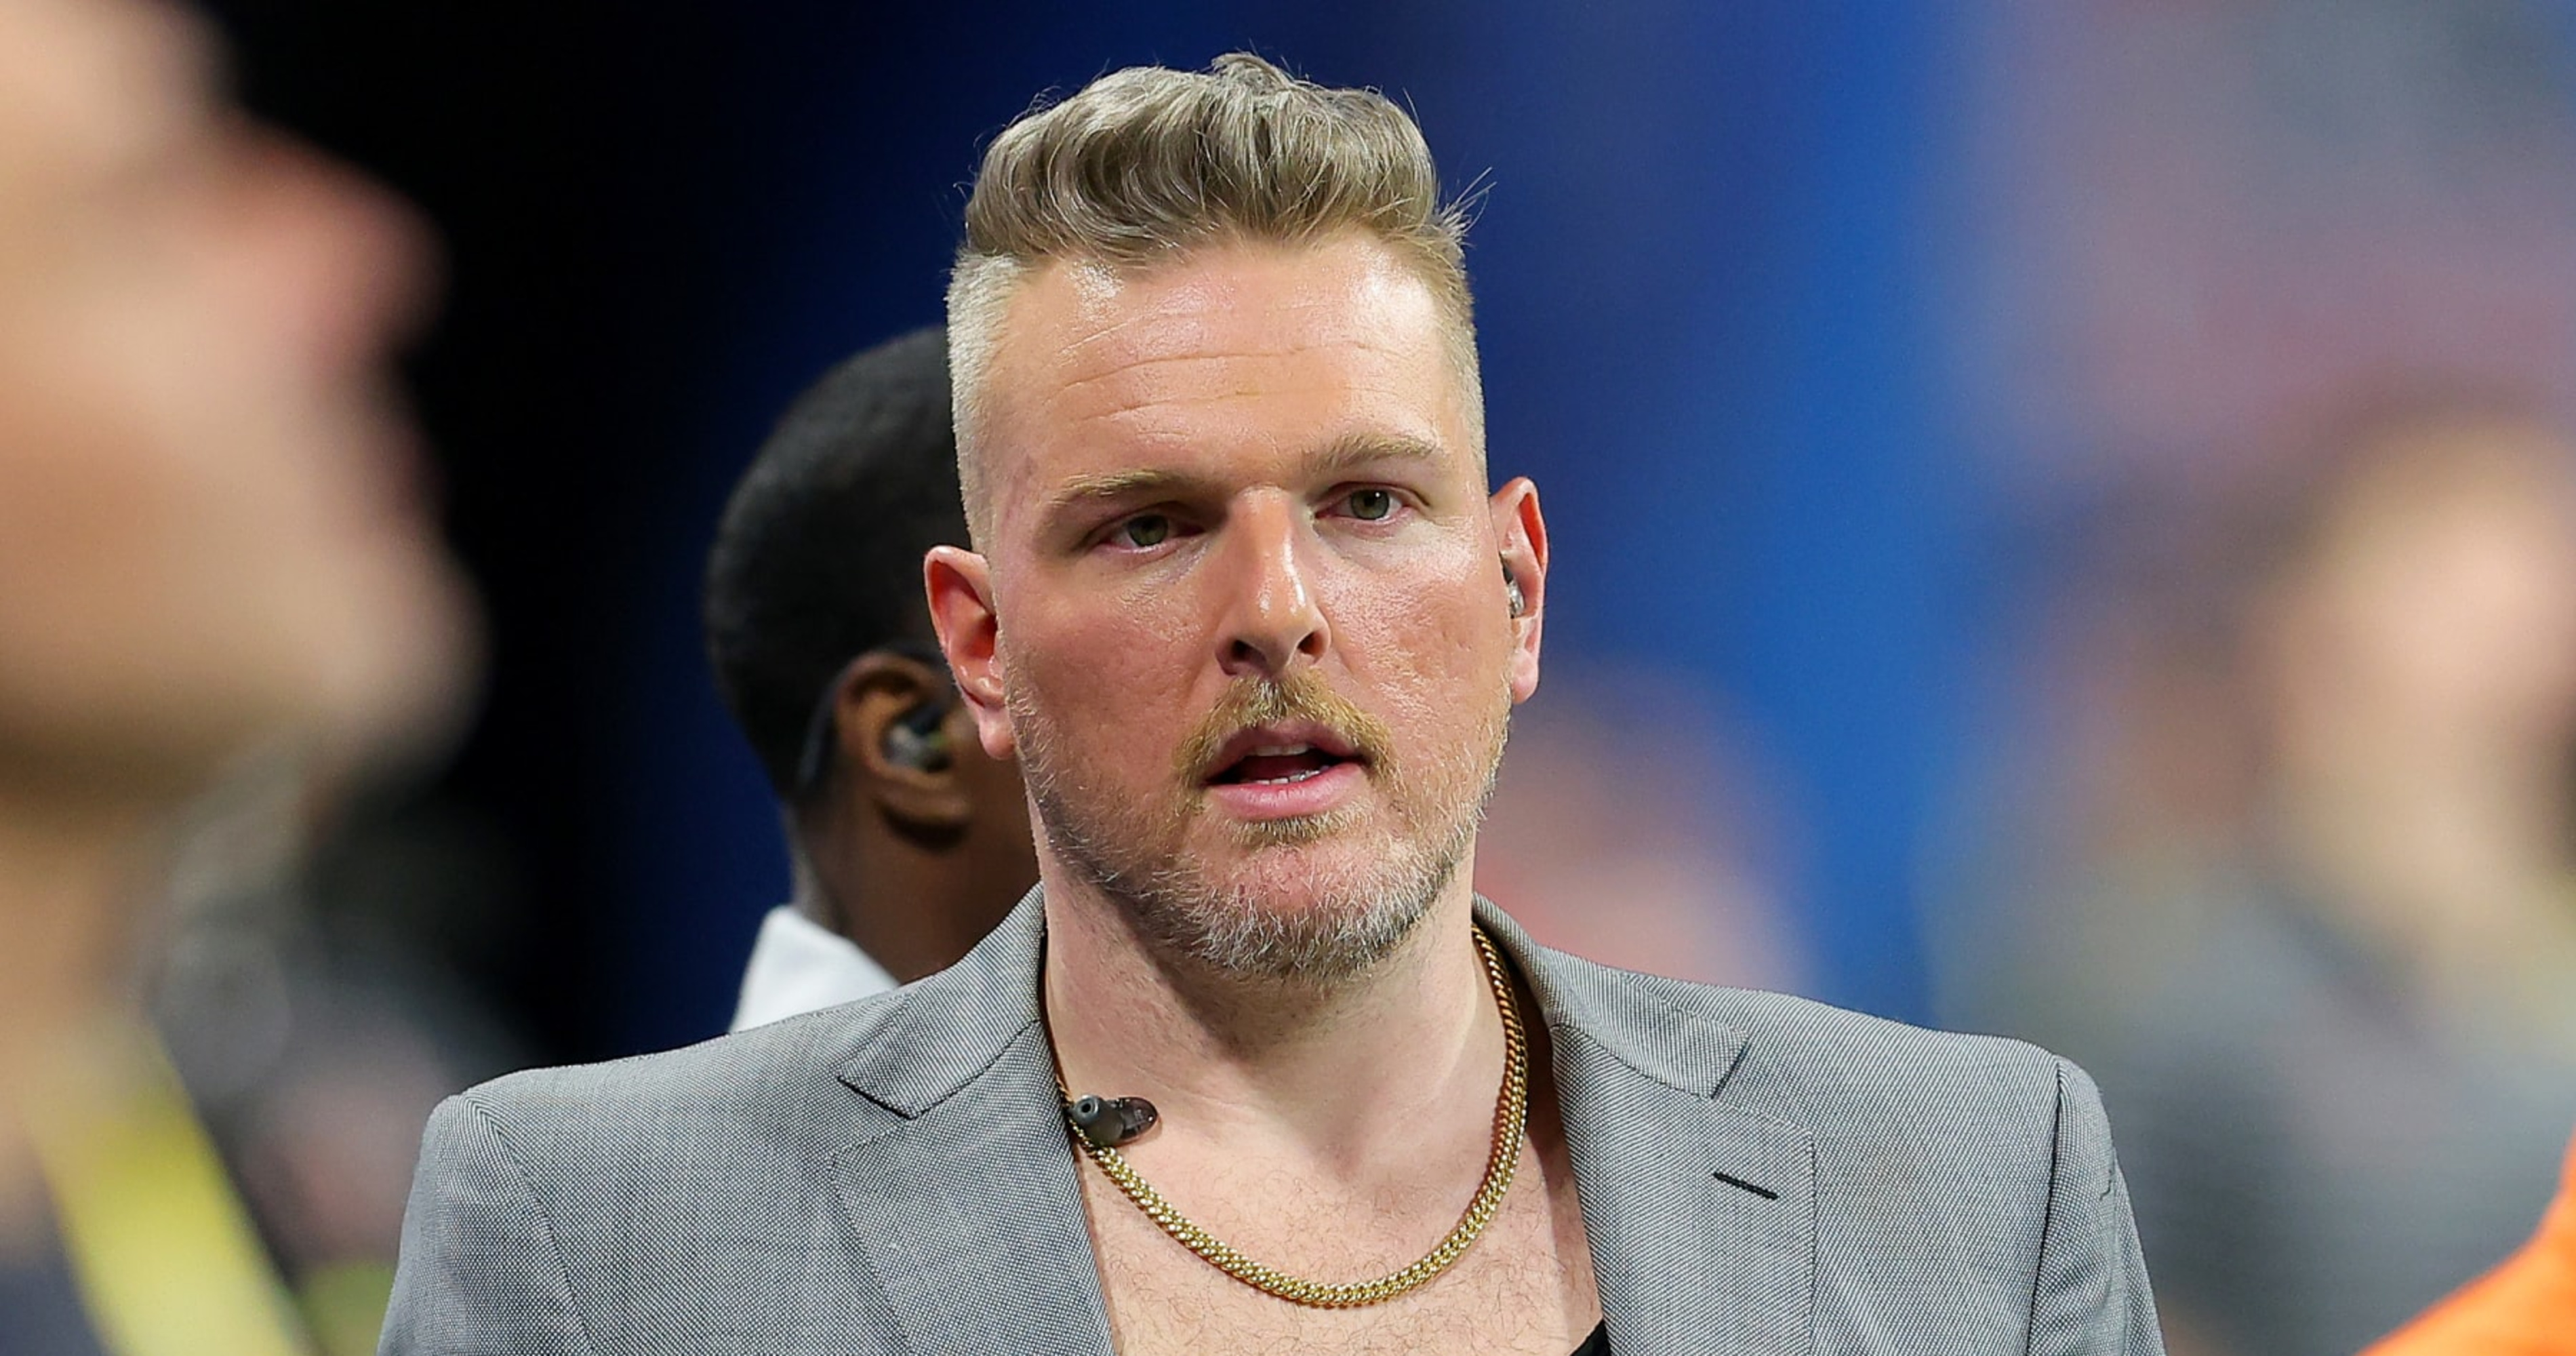 Report Pat McAfee Signs Five-Year ESPN Deal Reportedly Valued at Approximately $85 Million